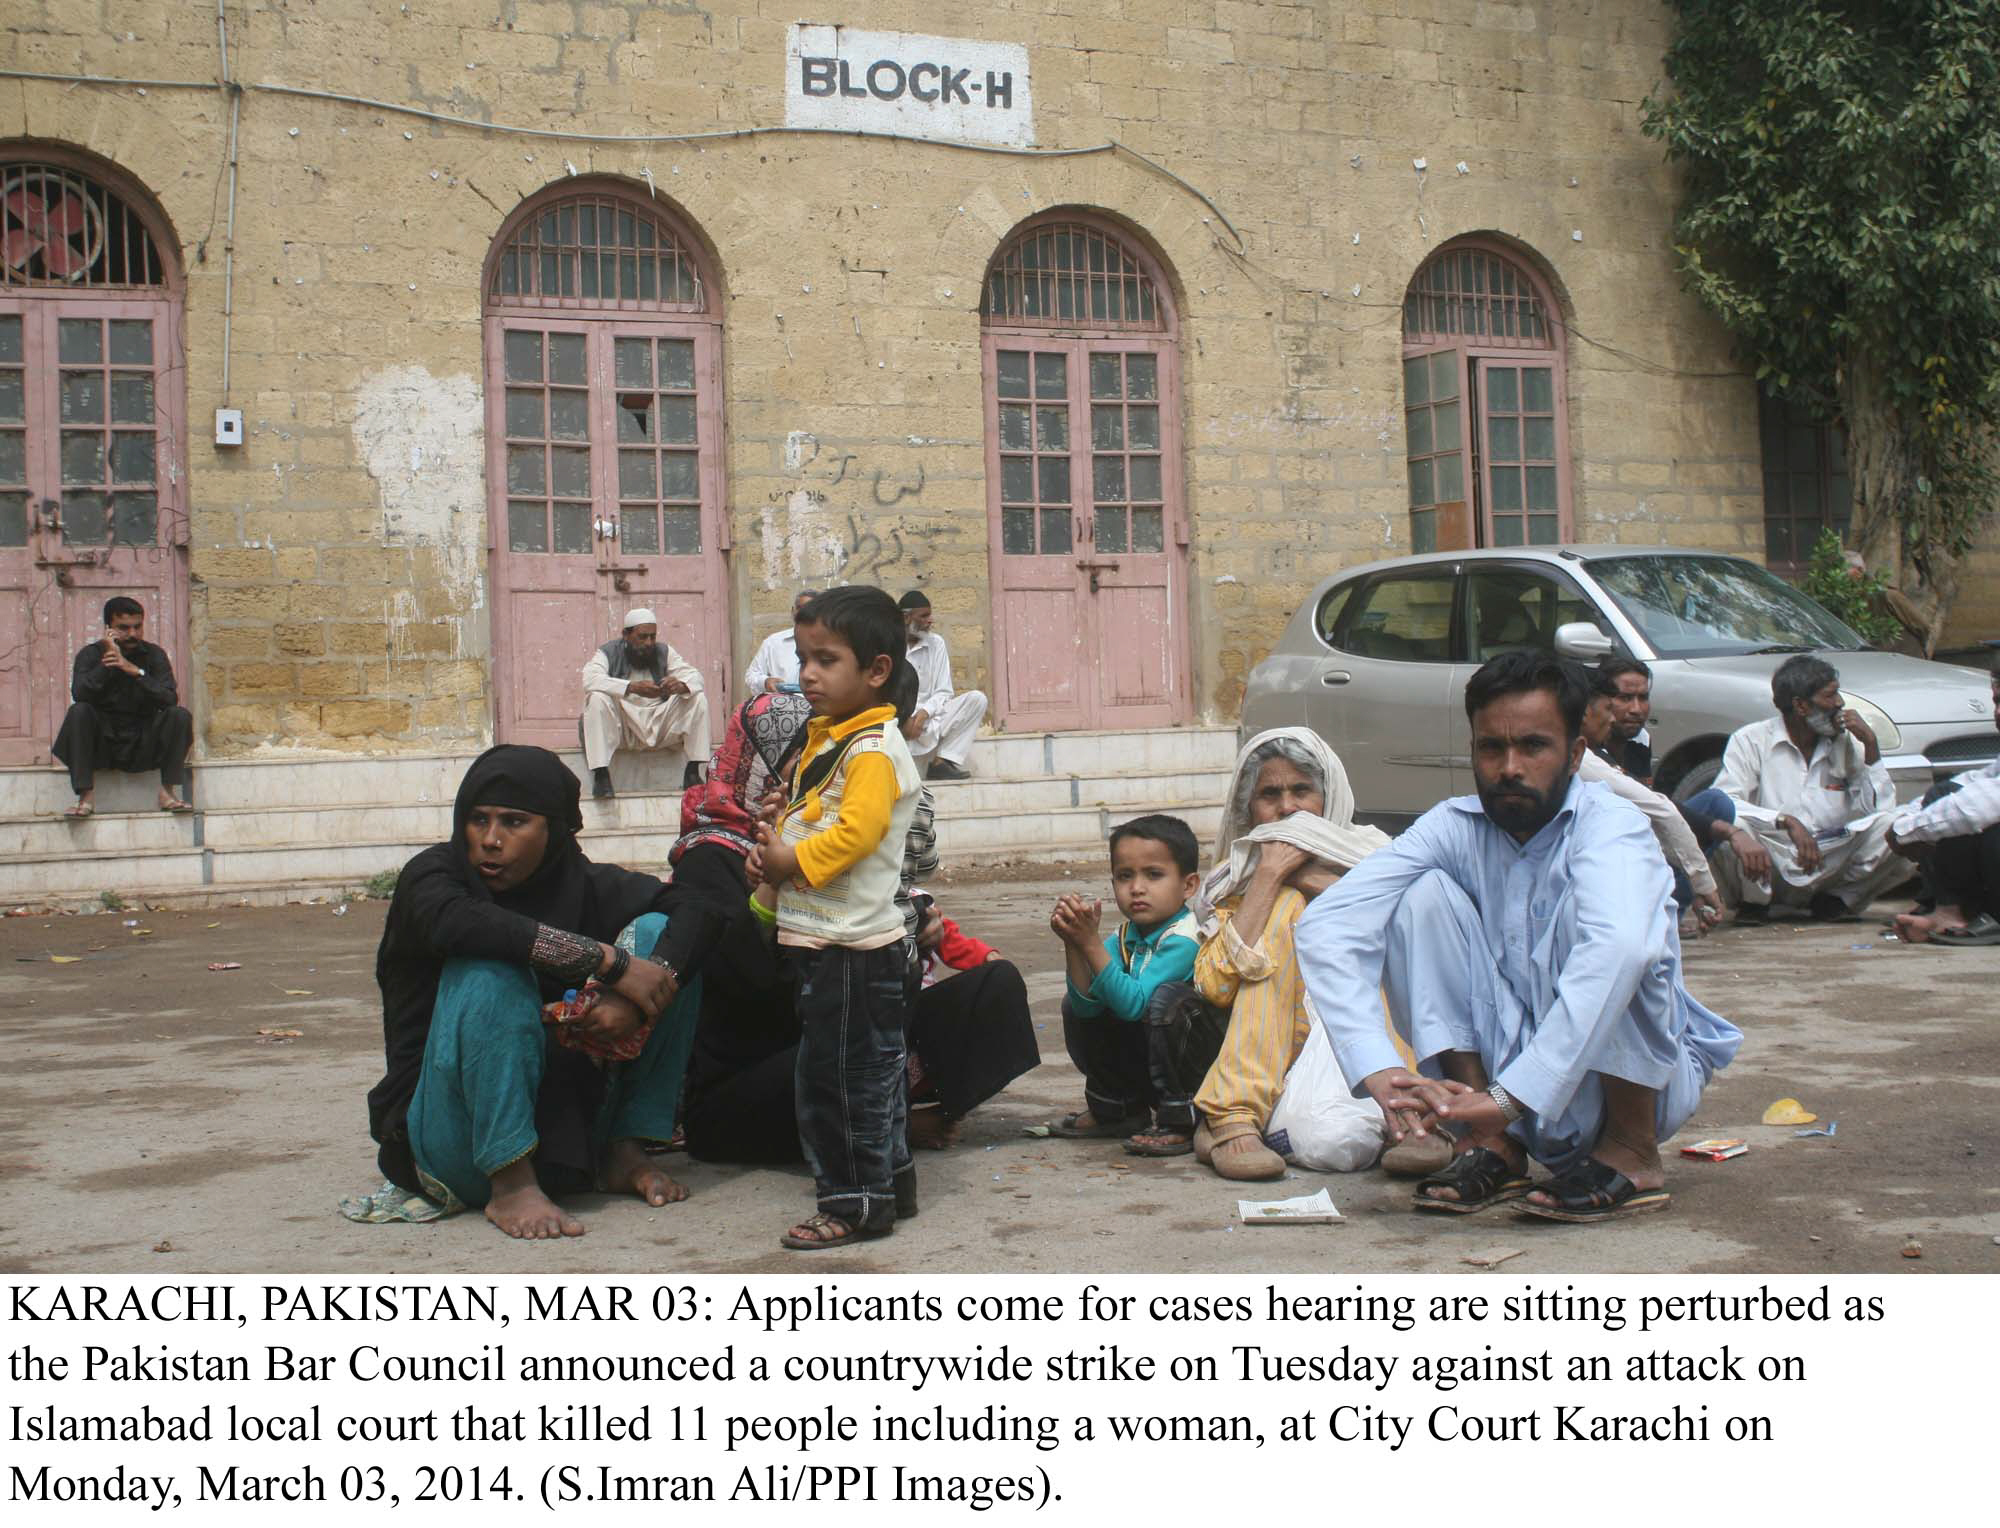 a family waits outside a closed block h of the city court after the pakistan bar council announced a country wide strike in wake of attacks in islamabad lower courts on monday photo ppi